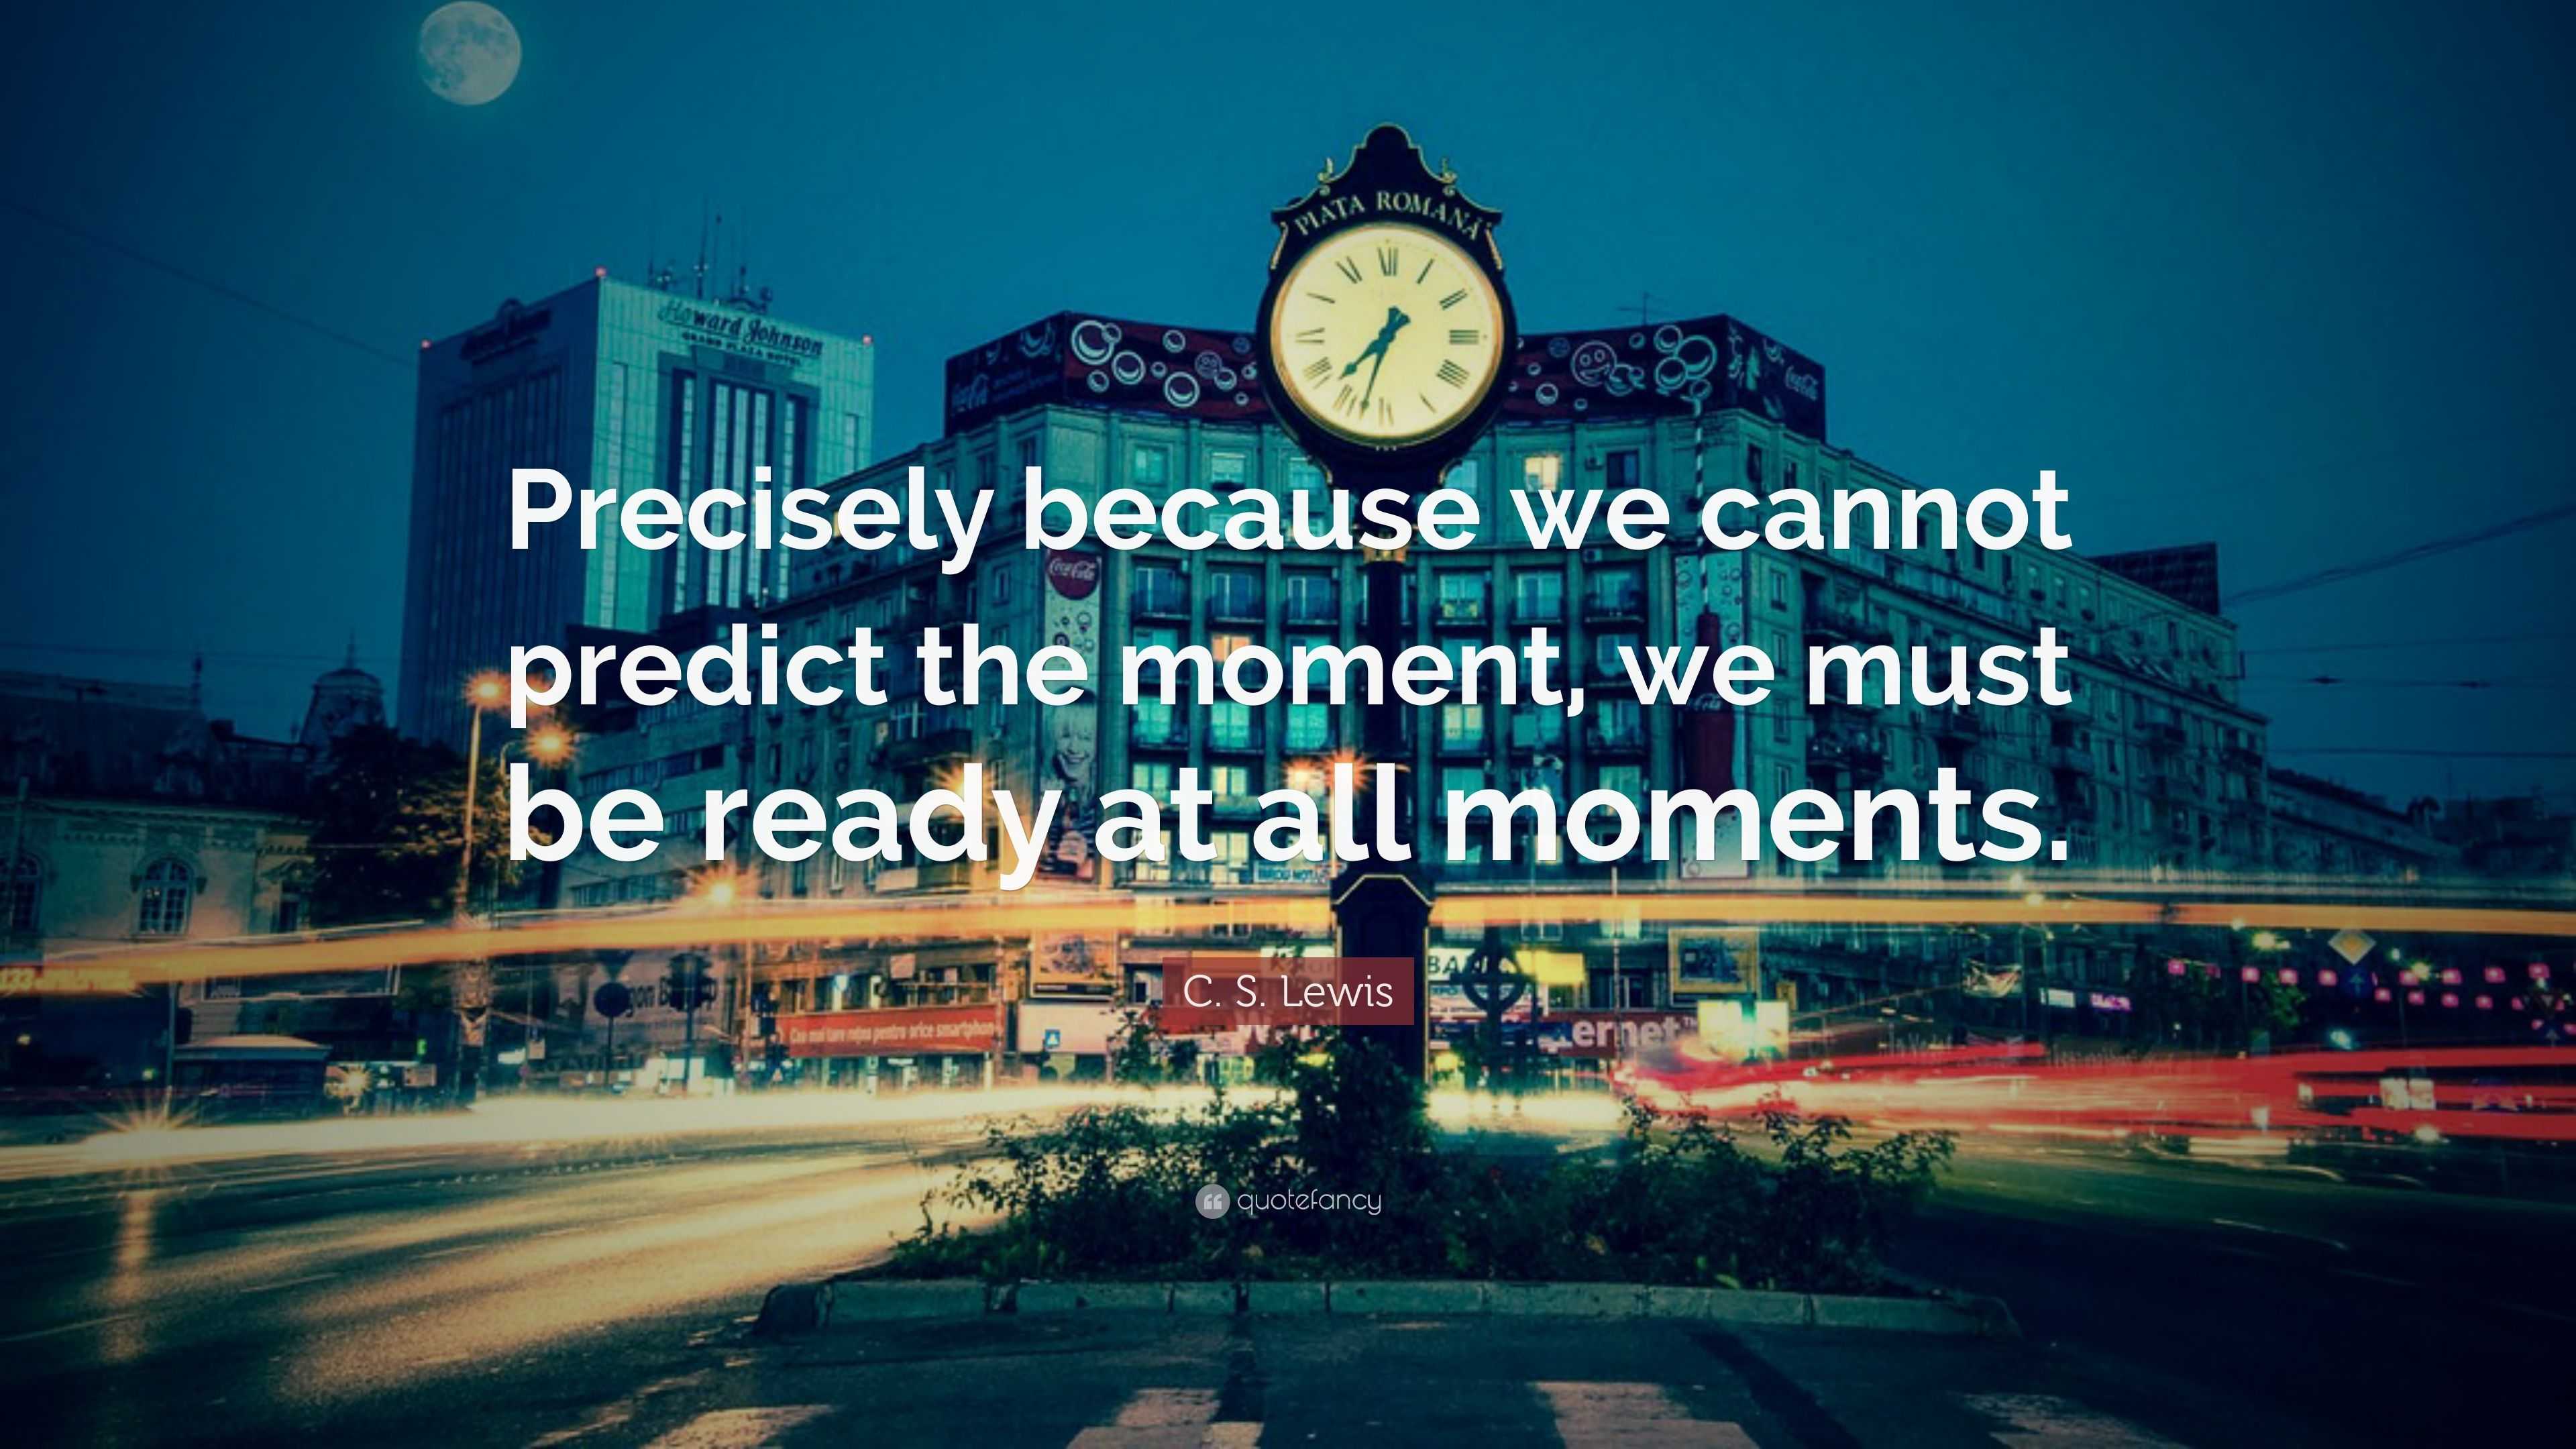 C. S. Lewis Quote: “Precisely because we cannot predict the moment, we ...